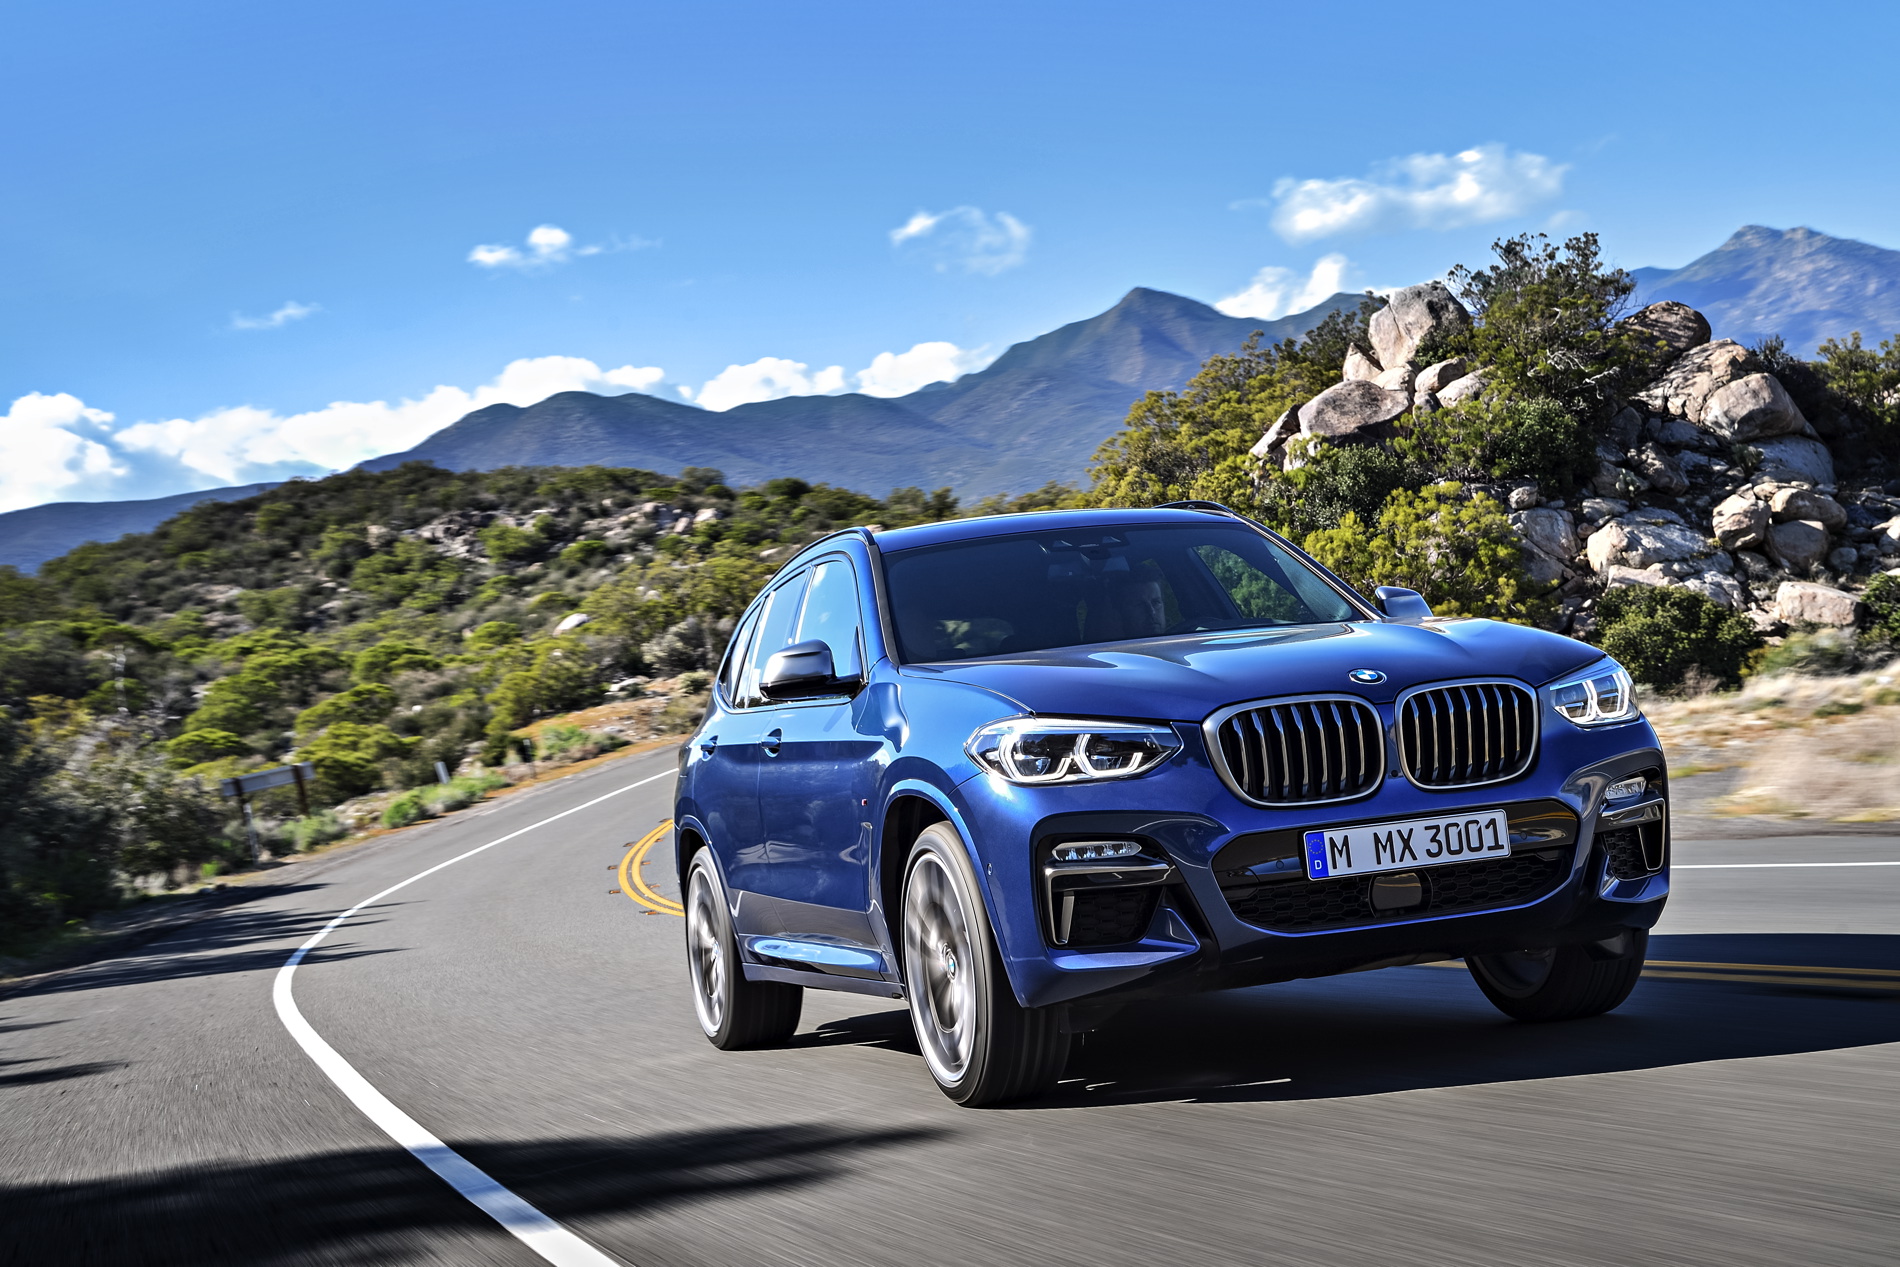 BMW X3 M40d available in July with 326 horsepower